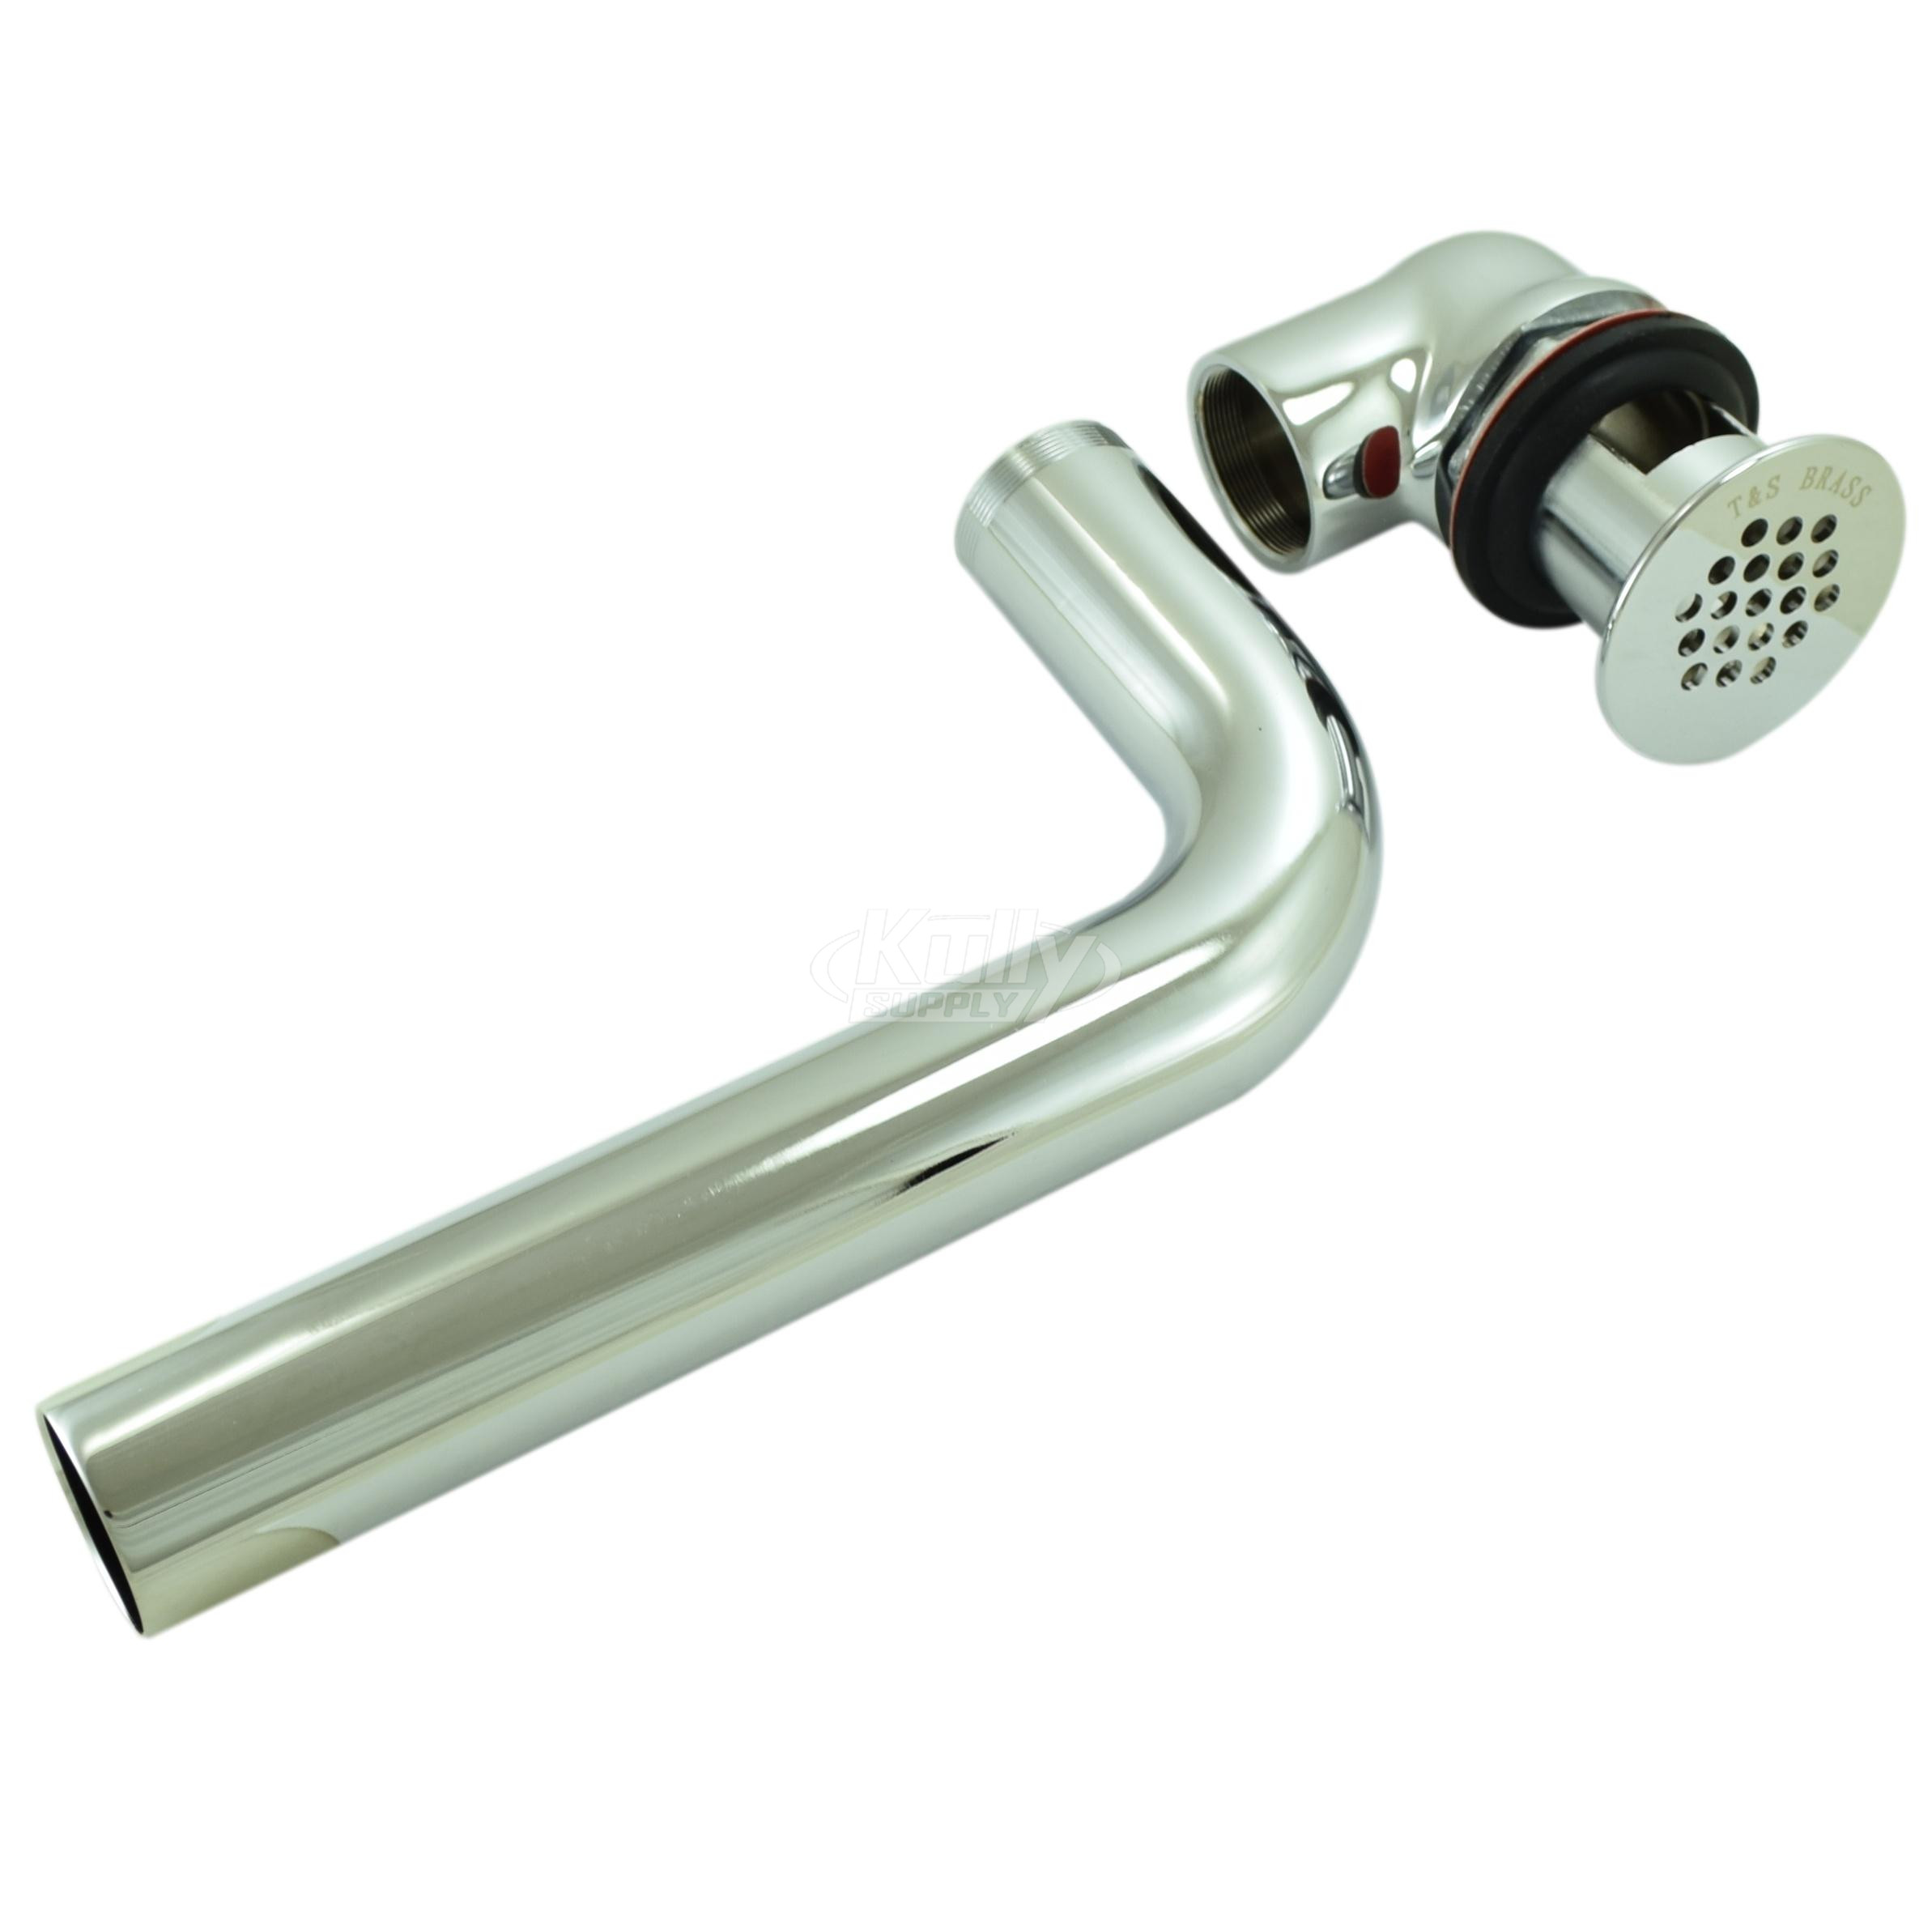 T&S Brass B-0898-OF Polished Chrome Plated Bronze Offset Grid Drain